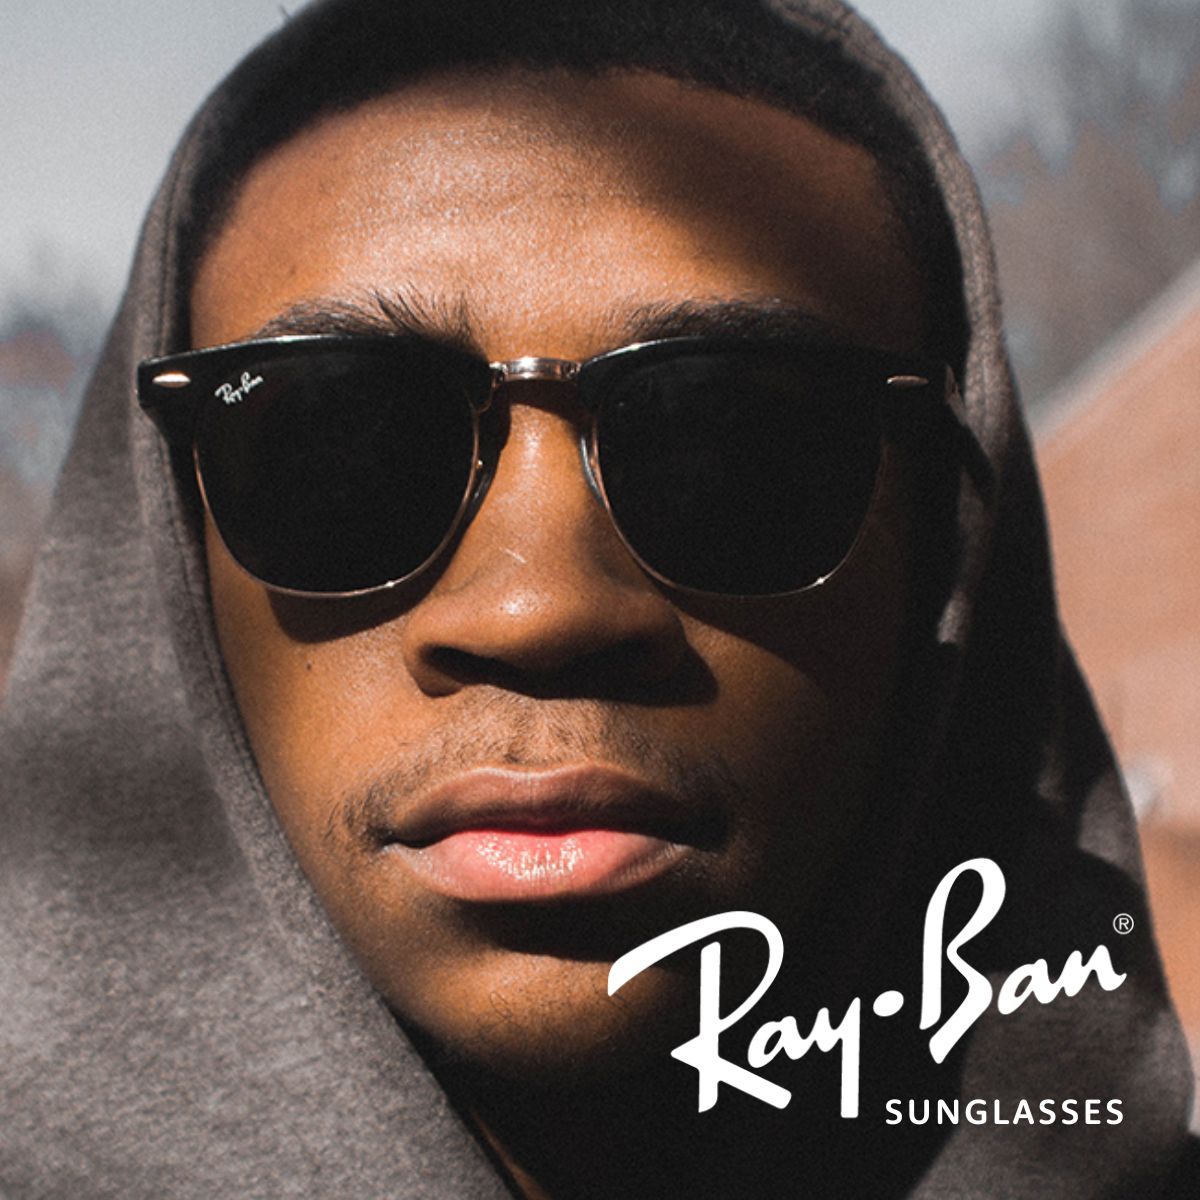 "Browse the latest Ray-Ban sunglasses collection at Optorium, featuring styles for both men and women with exclusive deals and complimentary shipping and returns."